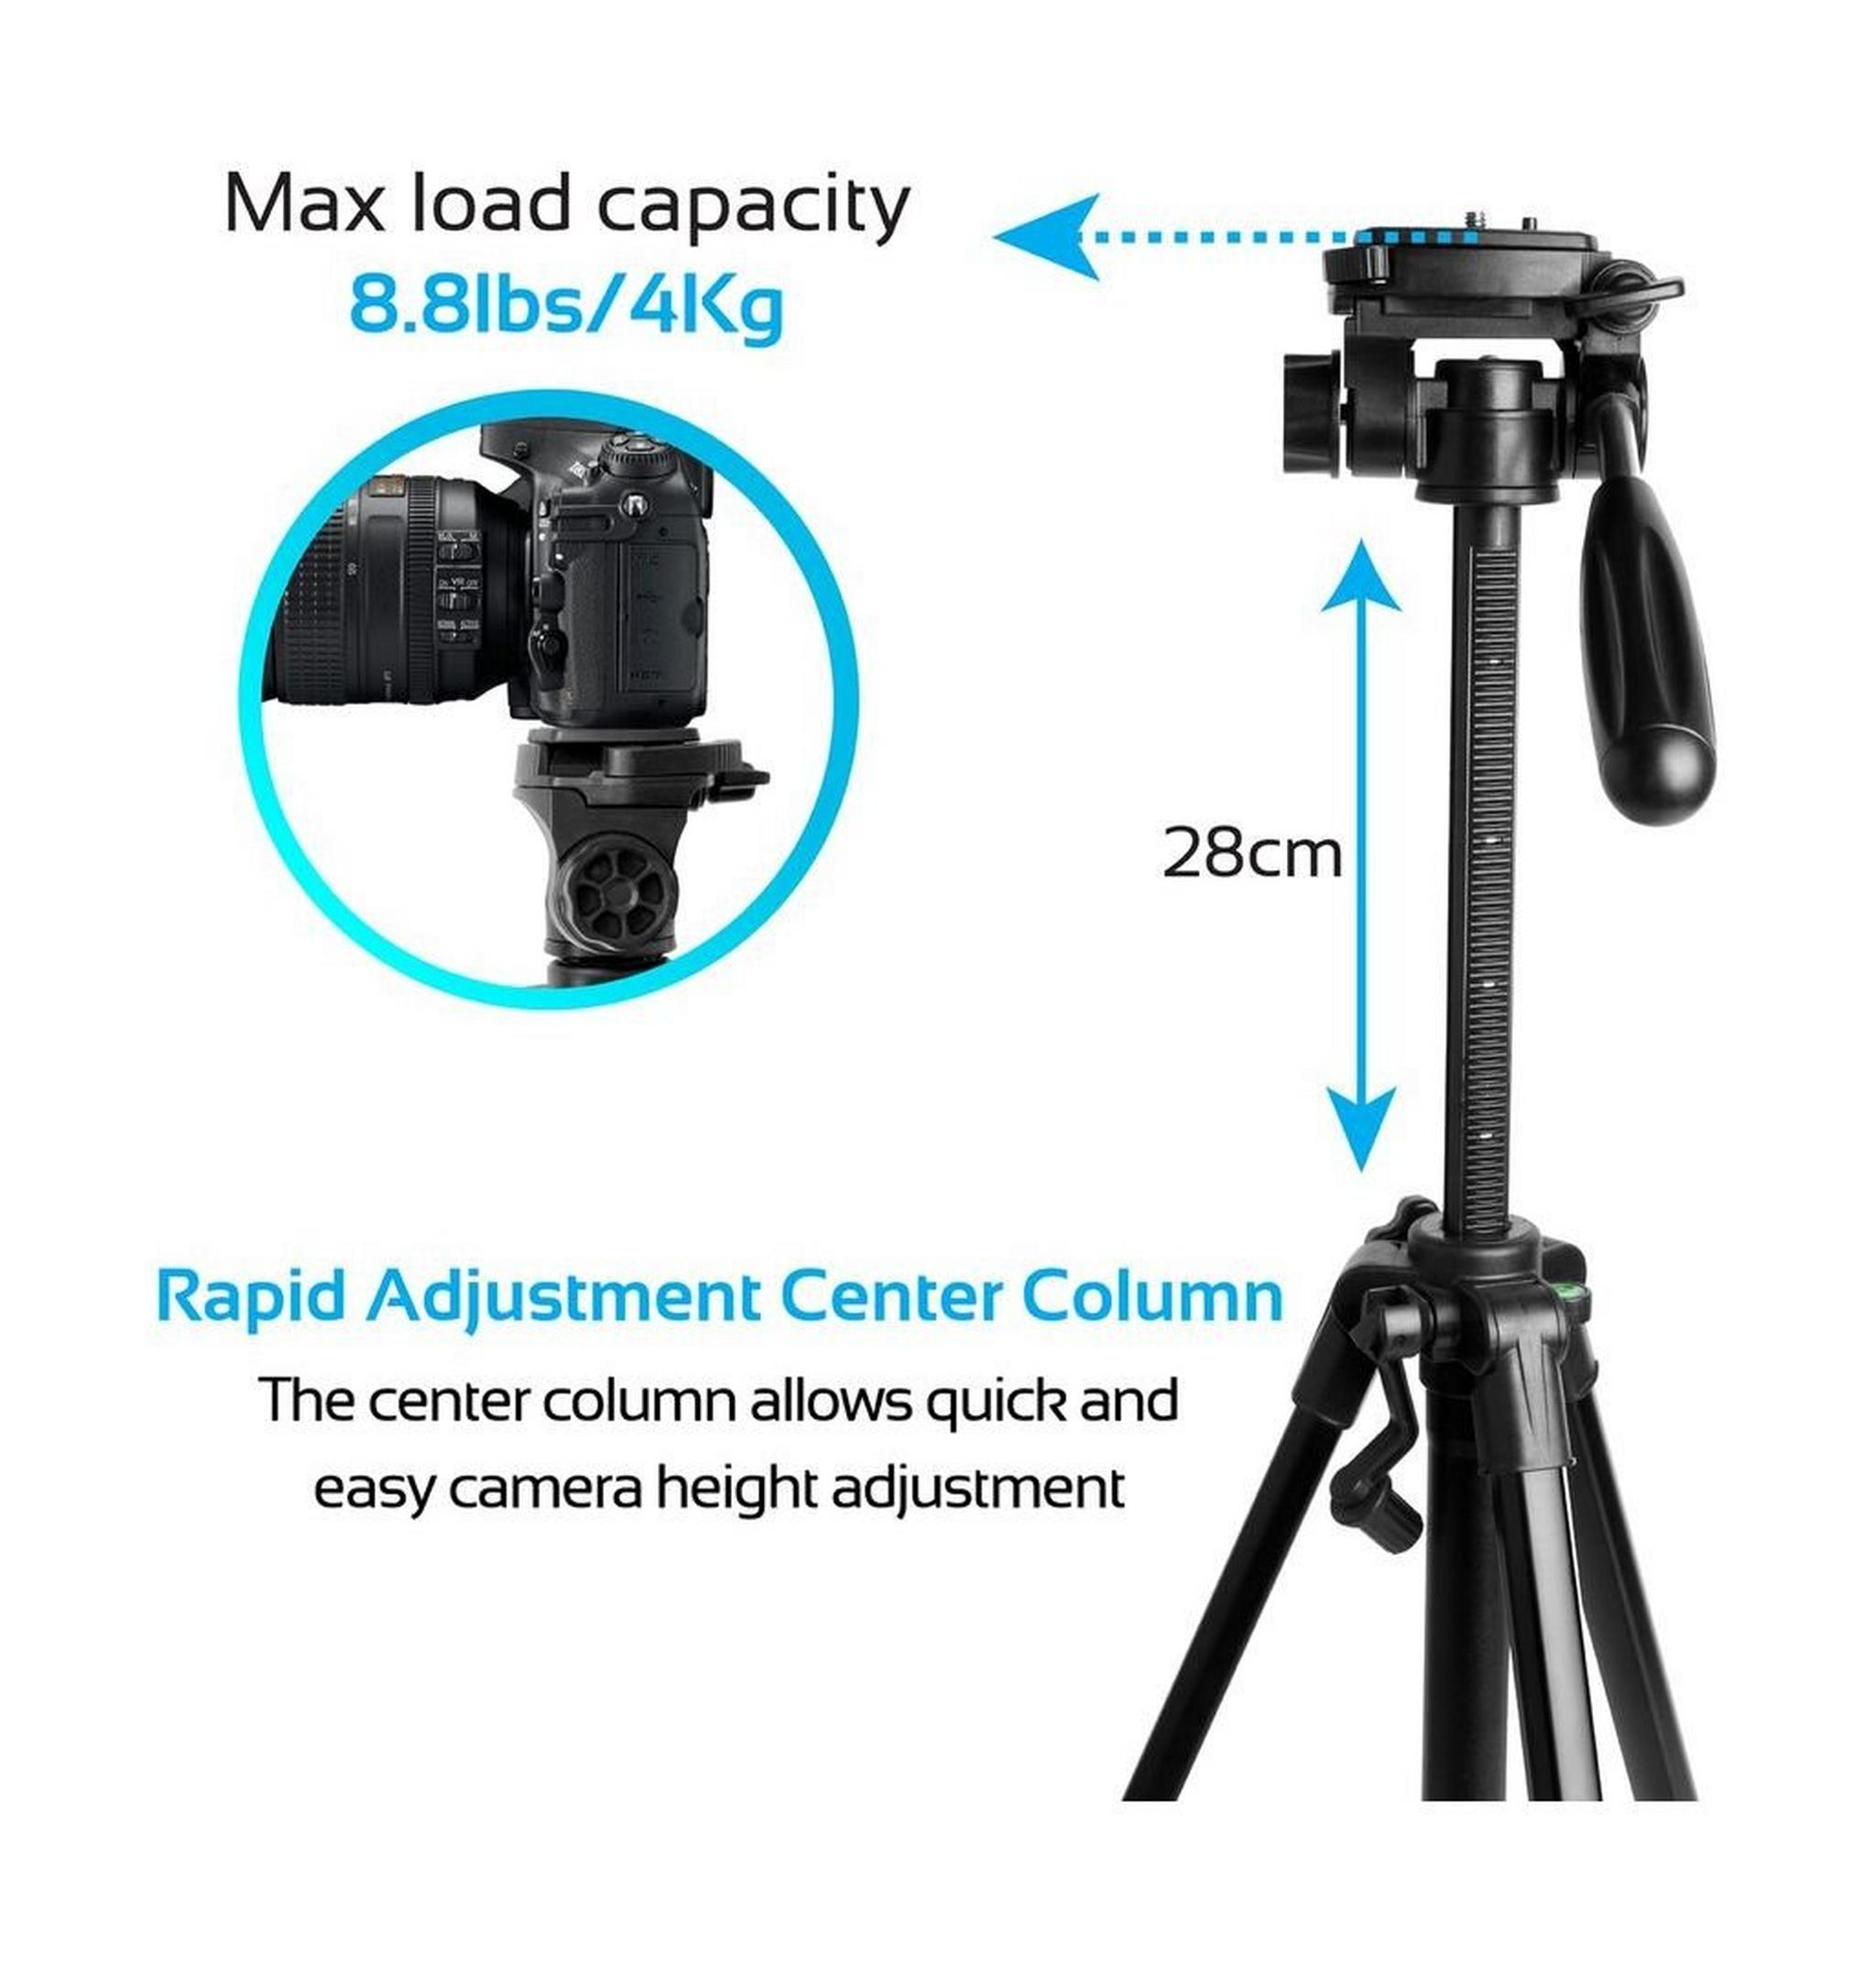 Promate Camera Tripod Stand 140cm with 3 Section Extendable Aluminum For DSLR, SLR, Camcorder, Action Cameras (Precise-140)